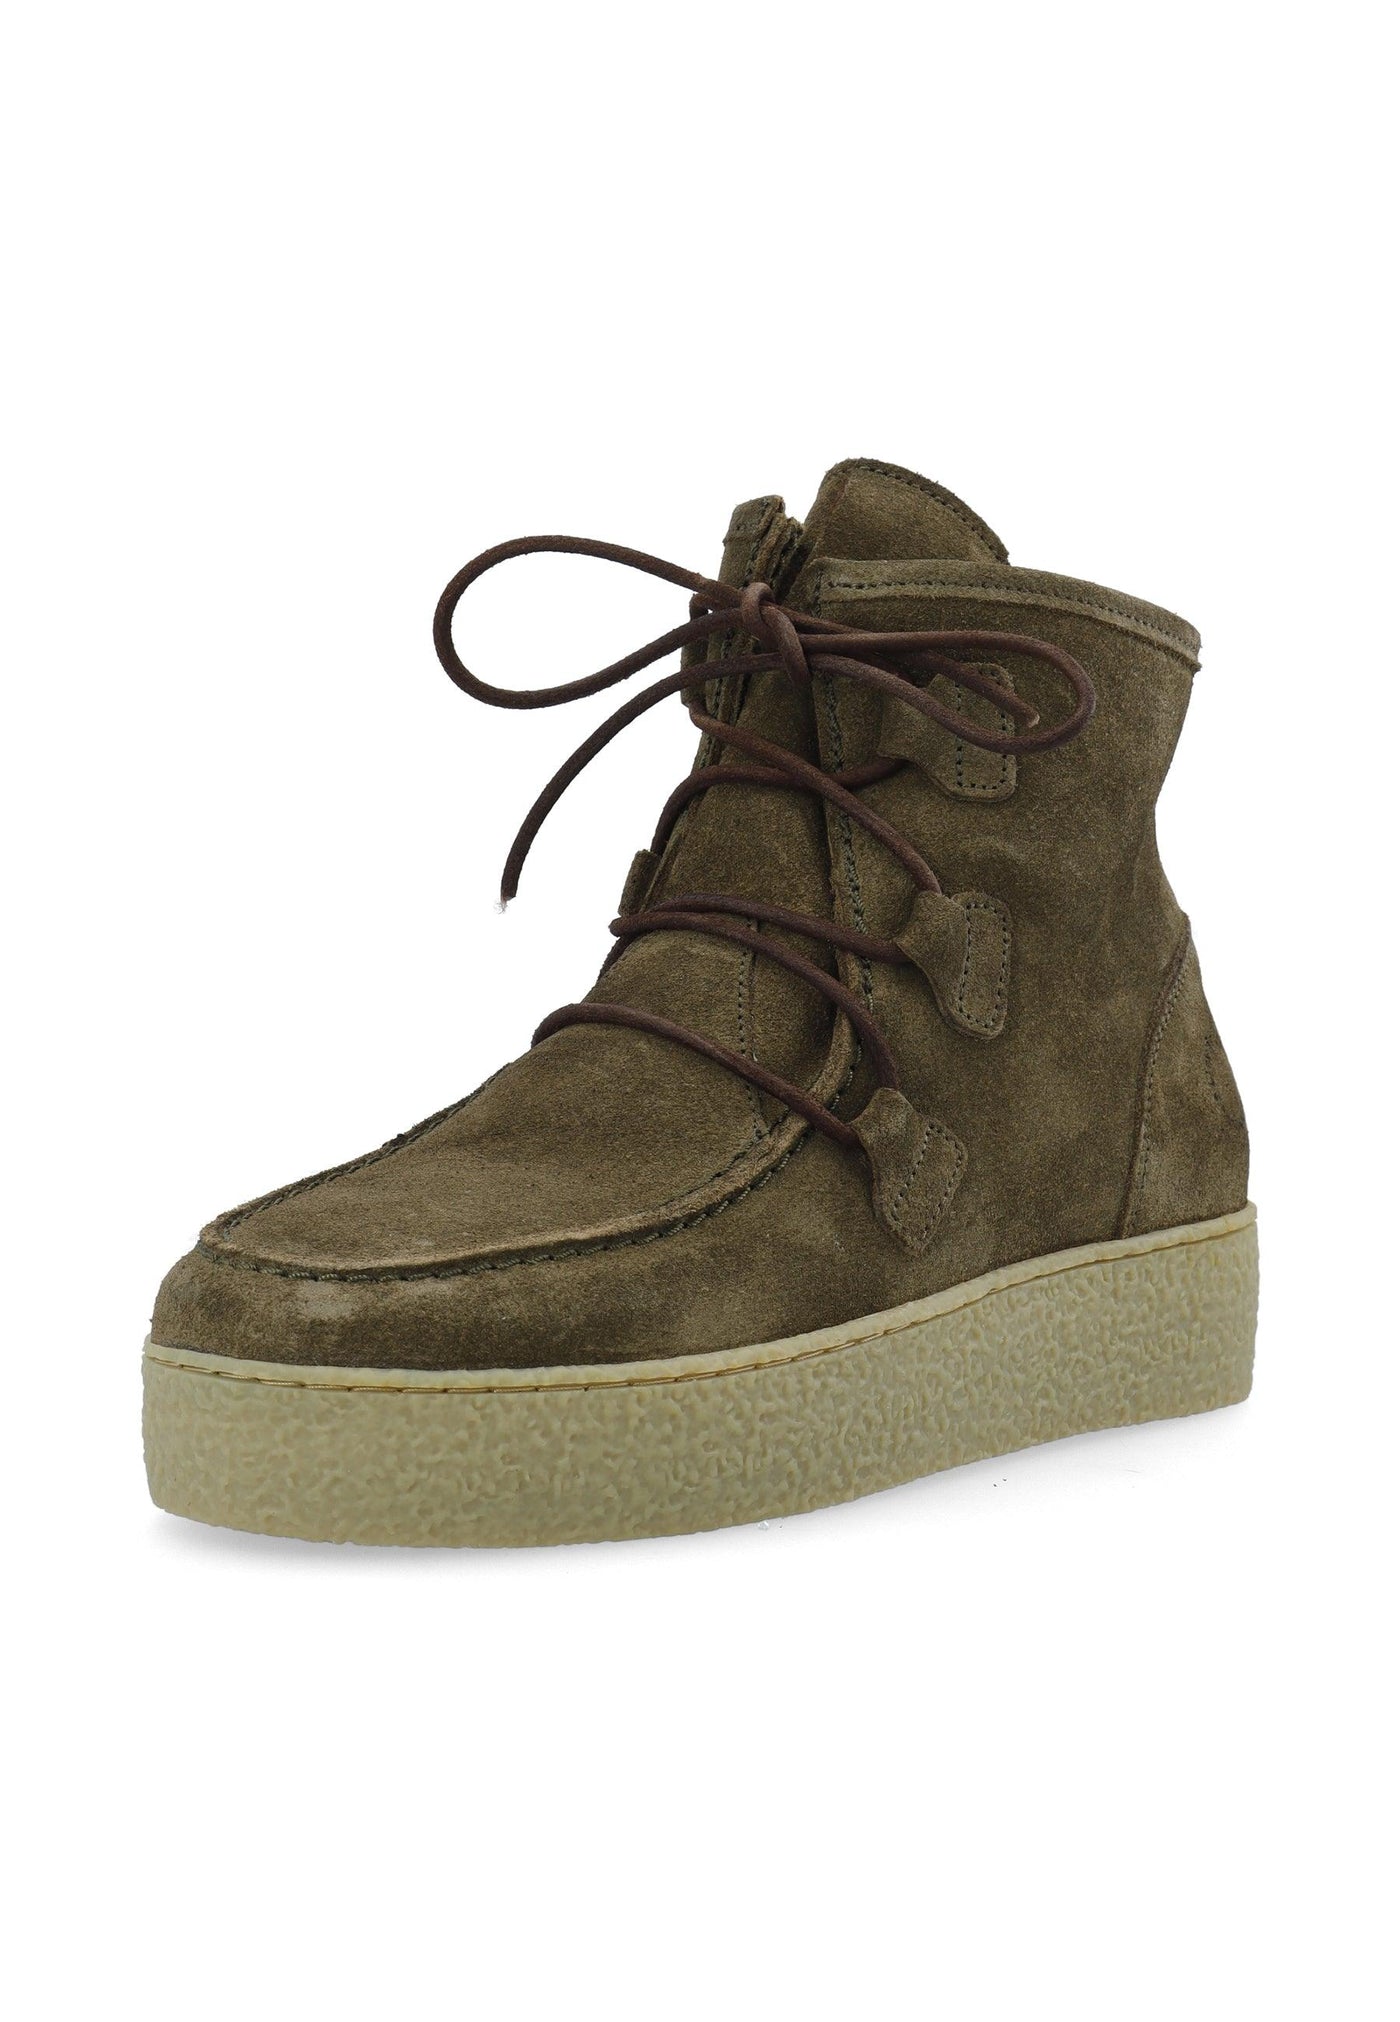 CASHOTT CASCAMILLA Warm Lining Oil Suede Lace Up Olive